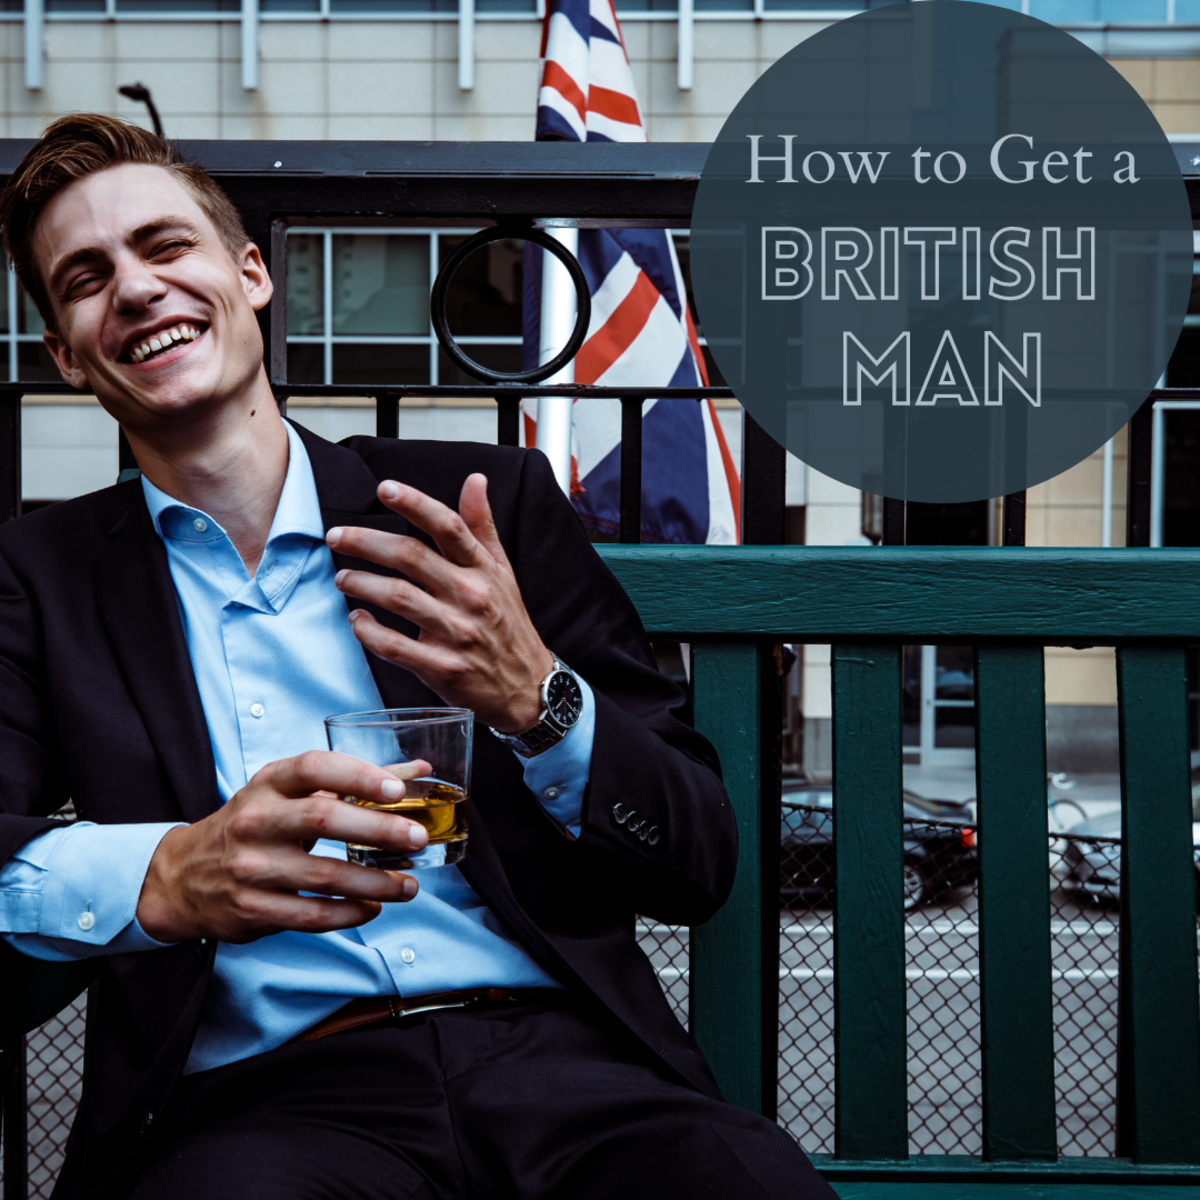 How can you charm a British man and get him interested in you?